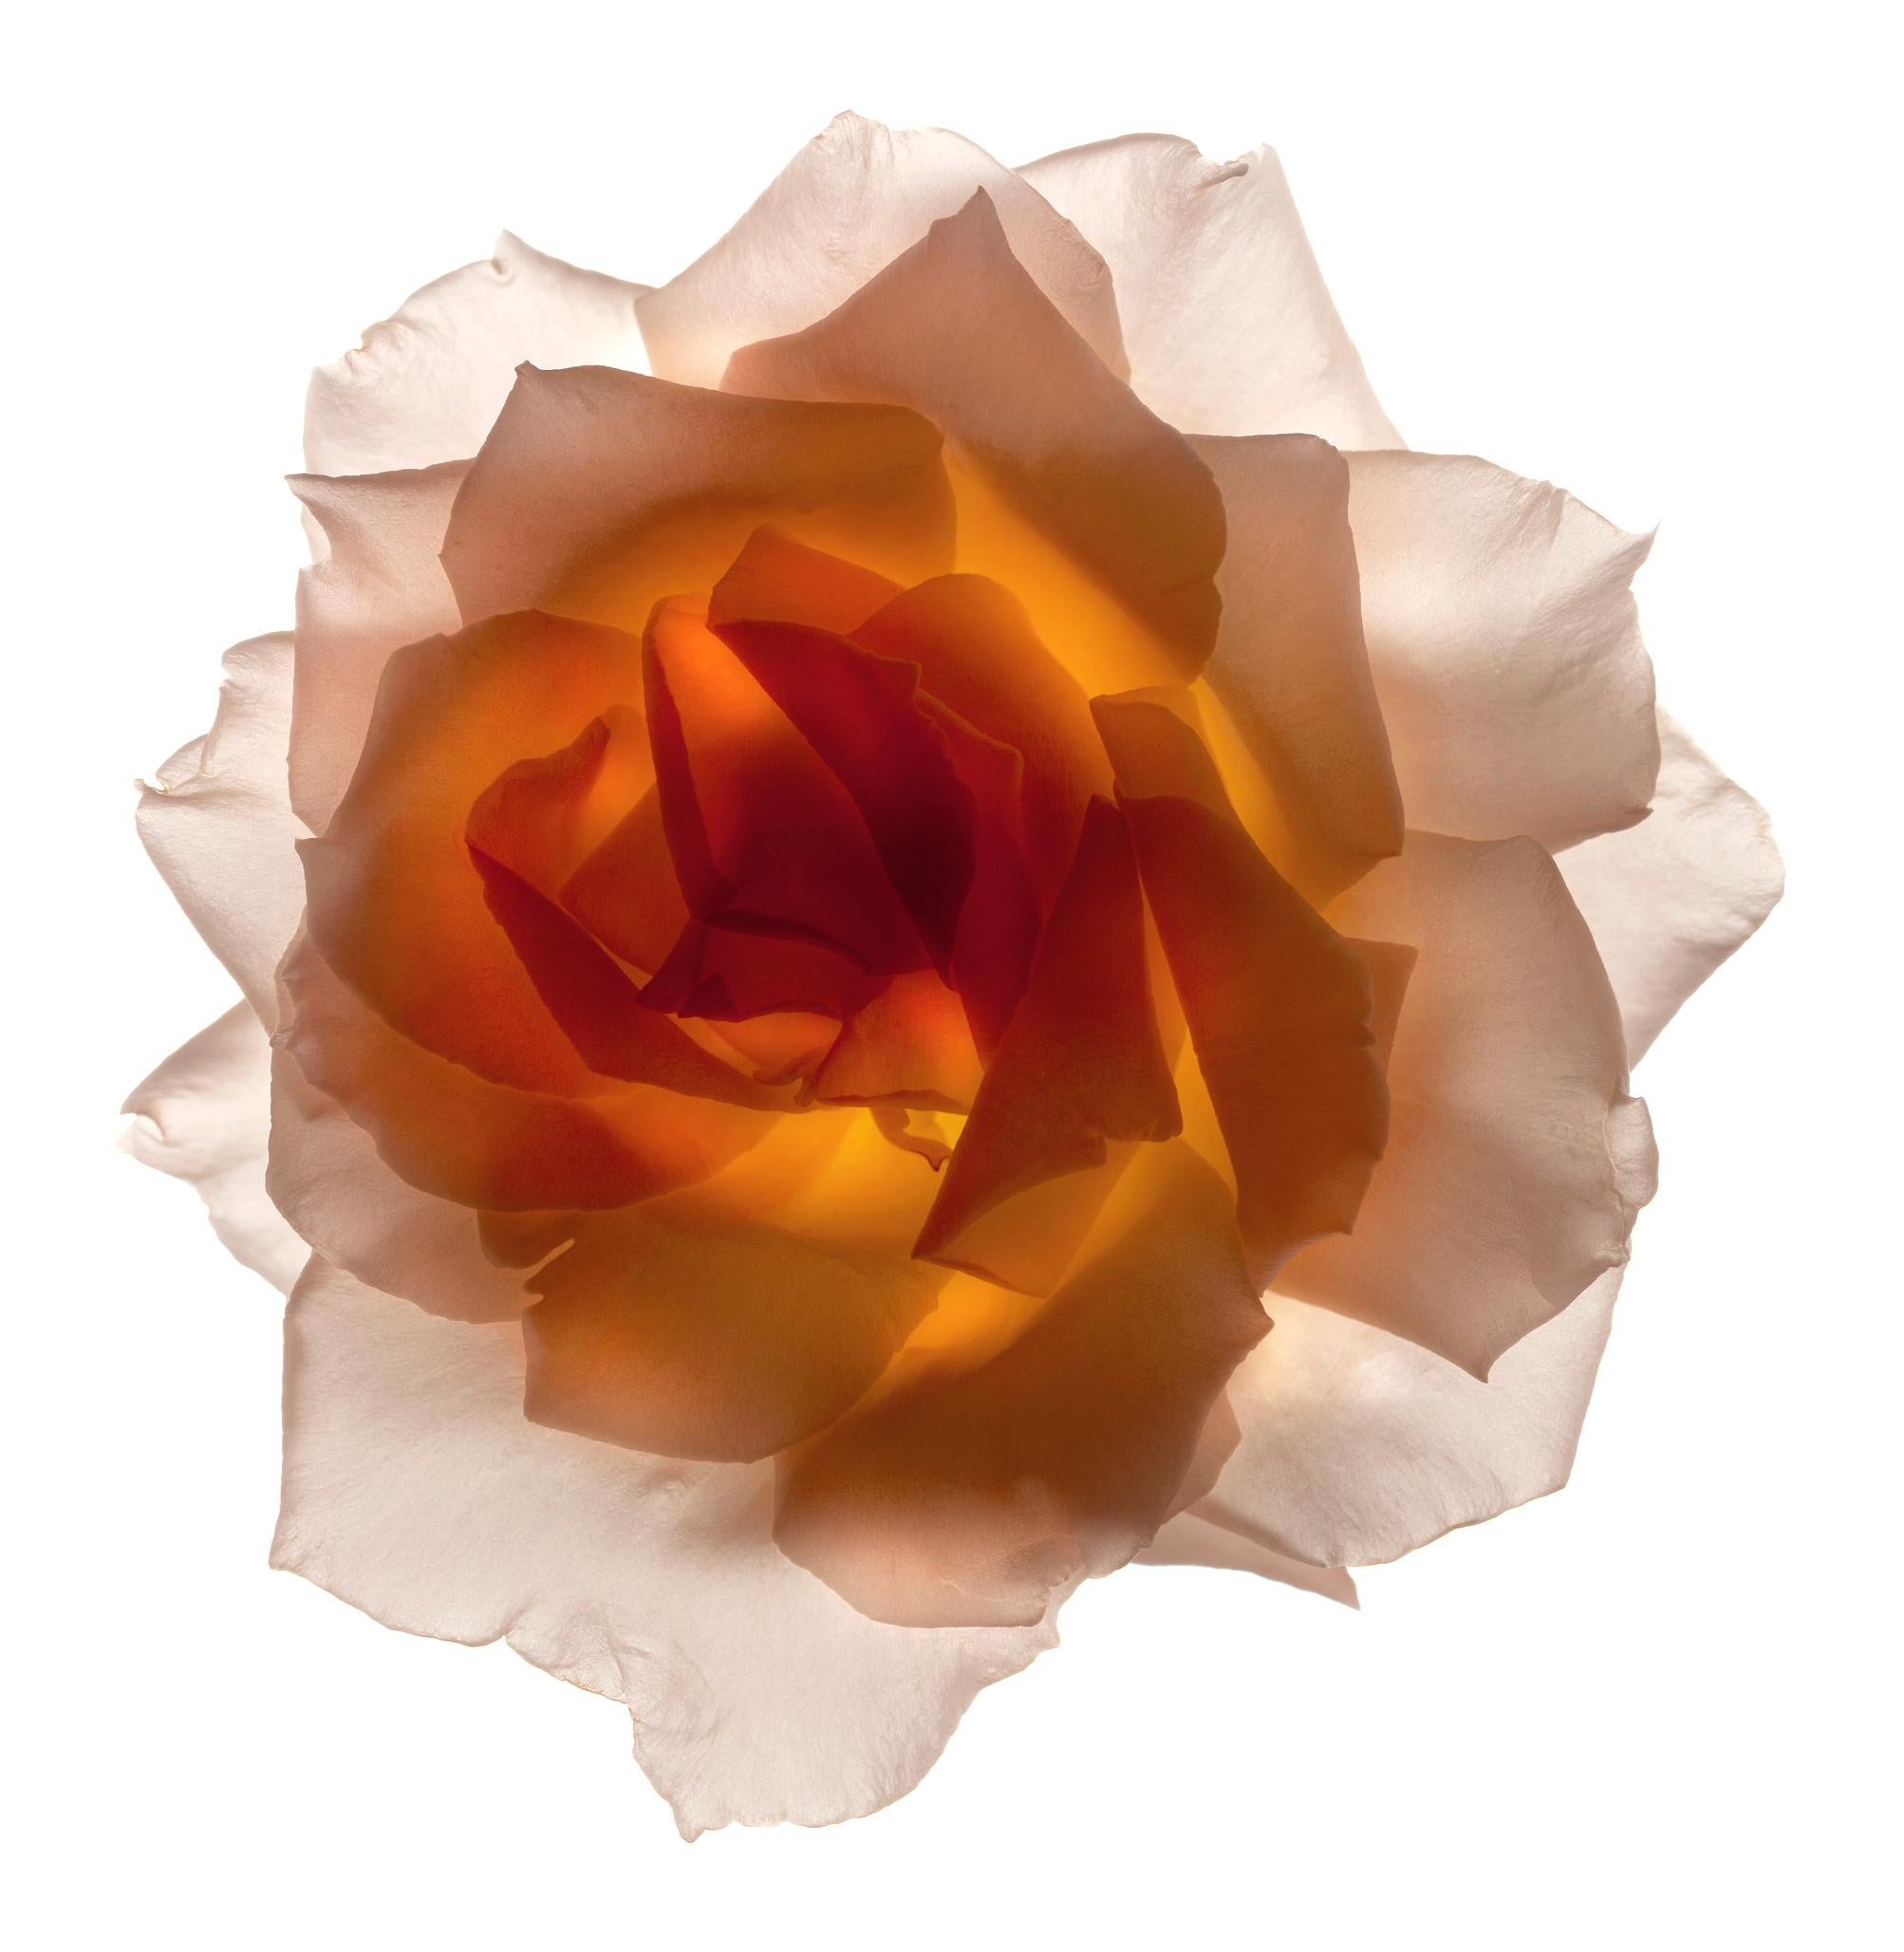 Chad Kleitsch Color Photograph - No. 21 (Framed Still Life Photograph of a Pastel Orange Rose Flower on White) 